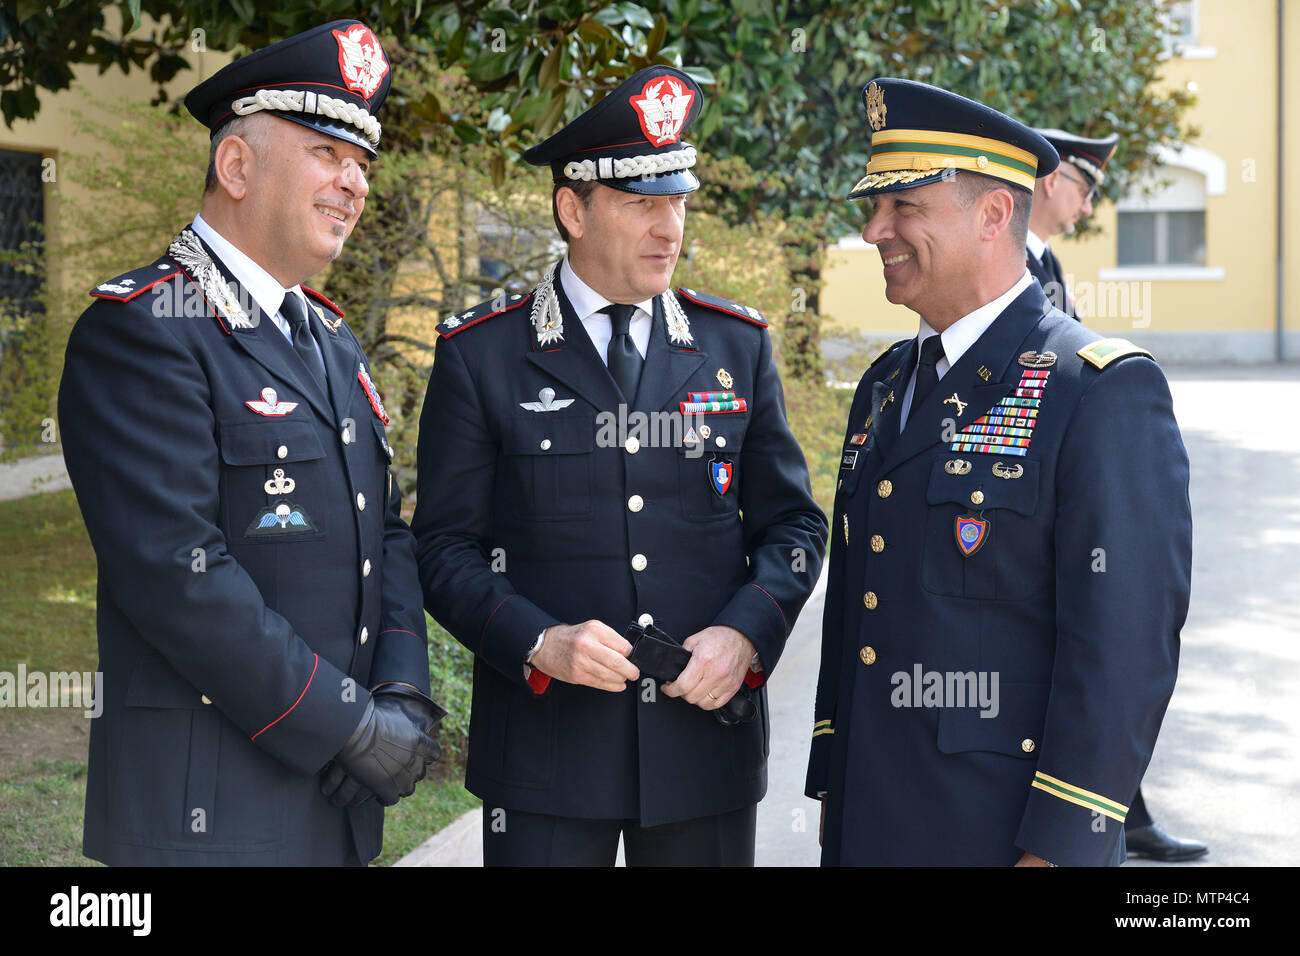 Brig. Gen. Giovanni Pietro Barbano, Center of Excellence for Stability Police Units (CoESPU) director (left), Brig. Gen. Fabrizio Parrulli, protection of cultural heritage commander (center) and U.S. Army Col. Darius S. Gallegos, CoESPU deputy director (right), during visit by His Royal Highness Prince Charles, Prince of Wales at Center of Excellence for Stability Police Units (CoESPU) Vicenza, Italy, April 1, 2017. (U.S. Army Photo by Visual Information Specialist Paolo Bovo/released) Stock Photo